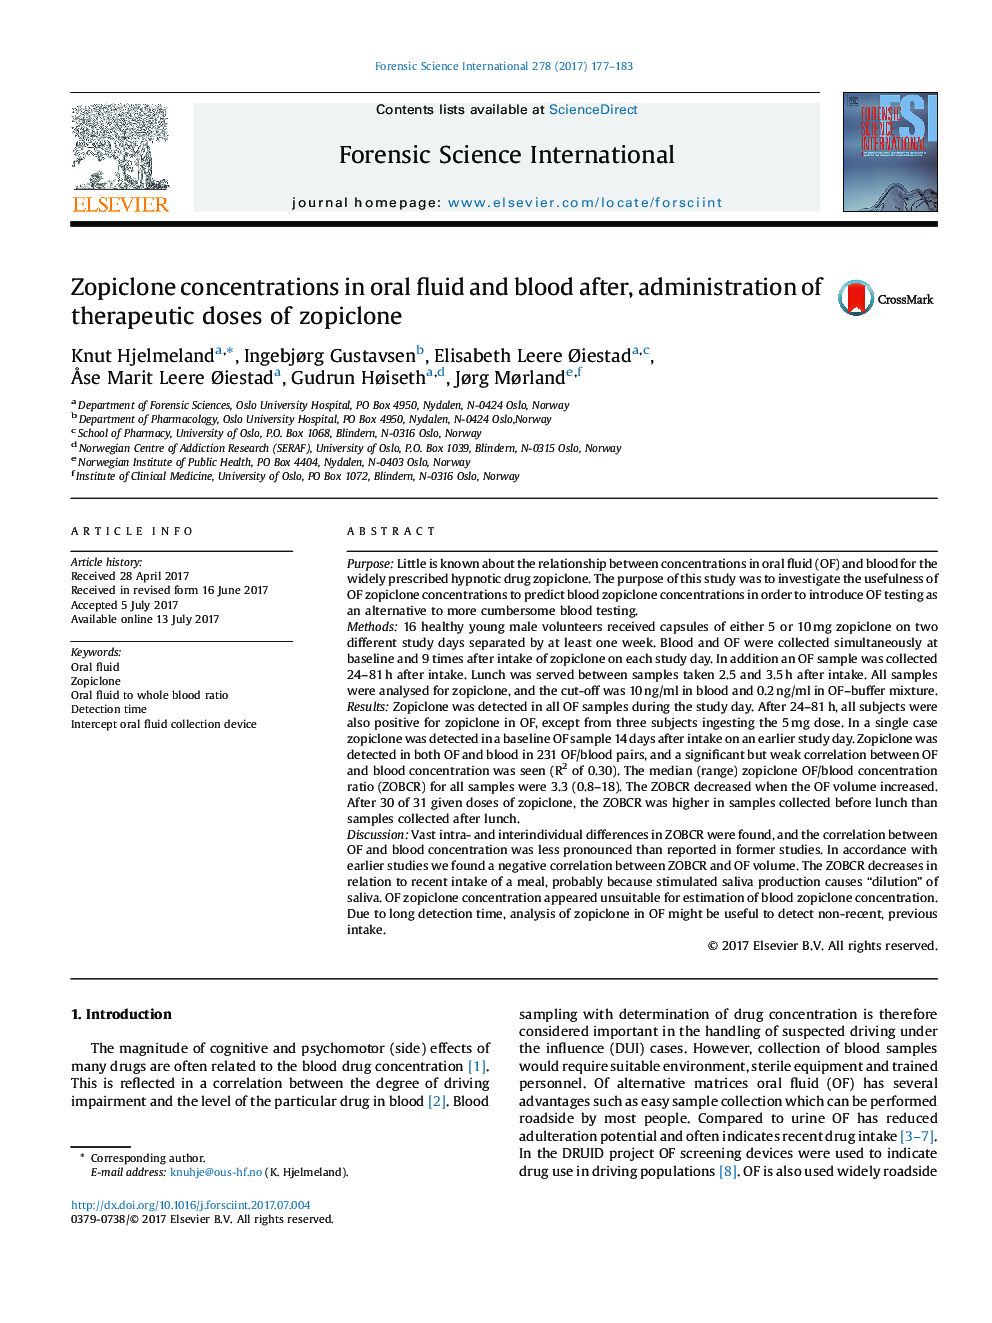 Zopiclone concentrations in oral fluid and blood after, administration of therapeutic doses of zopiclone